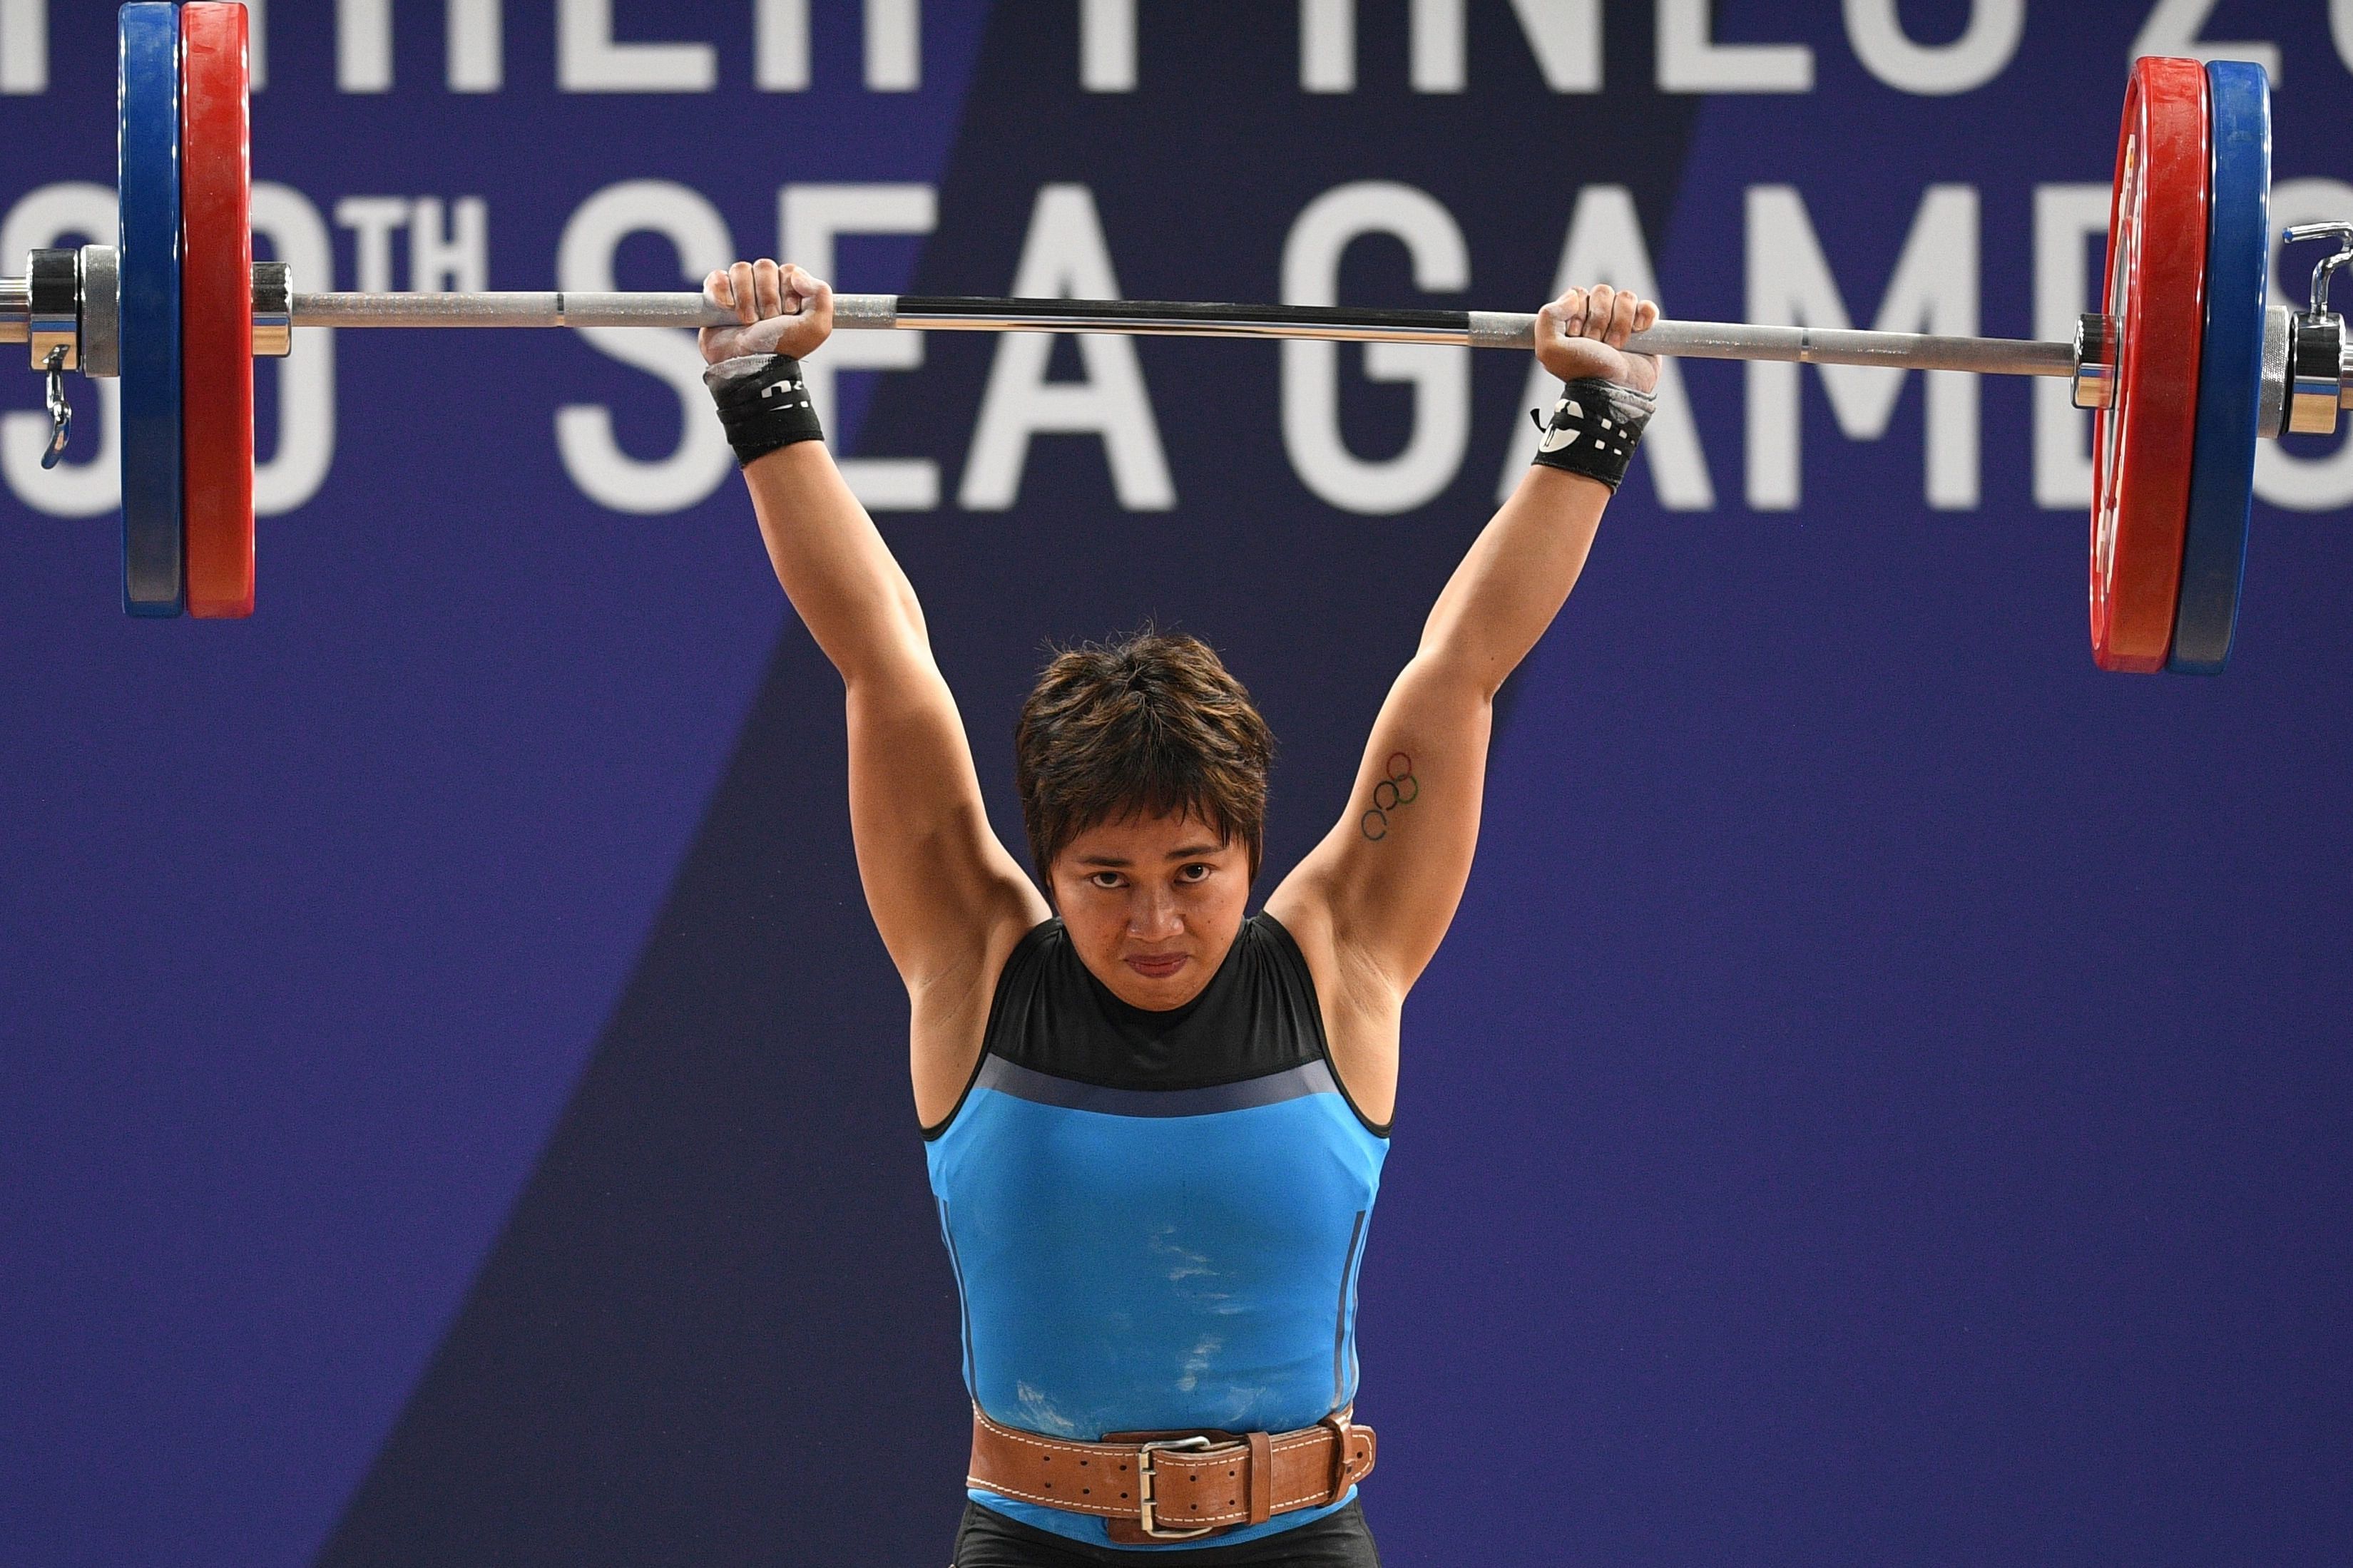 This file photo taken on December 2, 2019 shows Hidilyn Diaz of the Philippines competing in the women's 55kg weightlifting snatch event. (AFP photo)